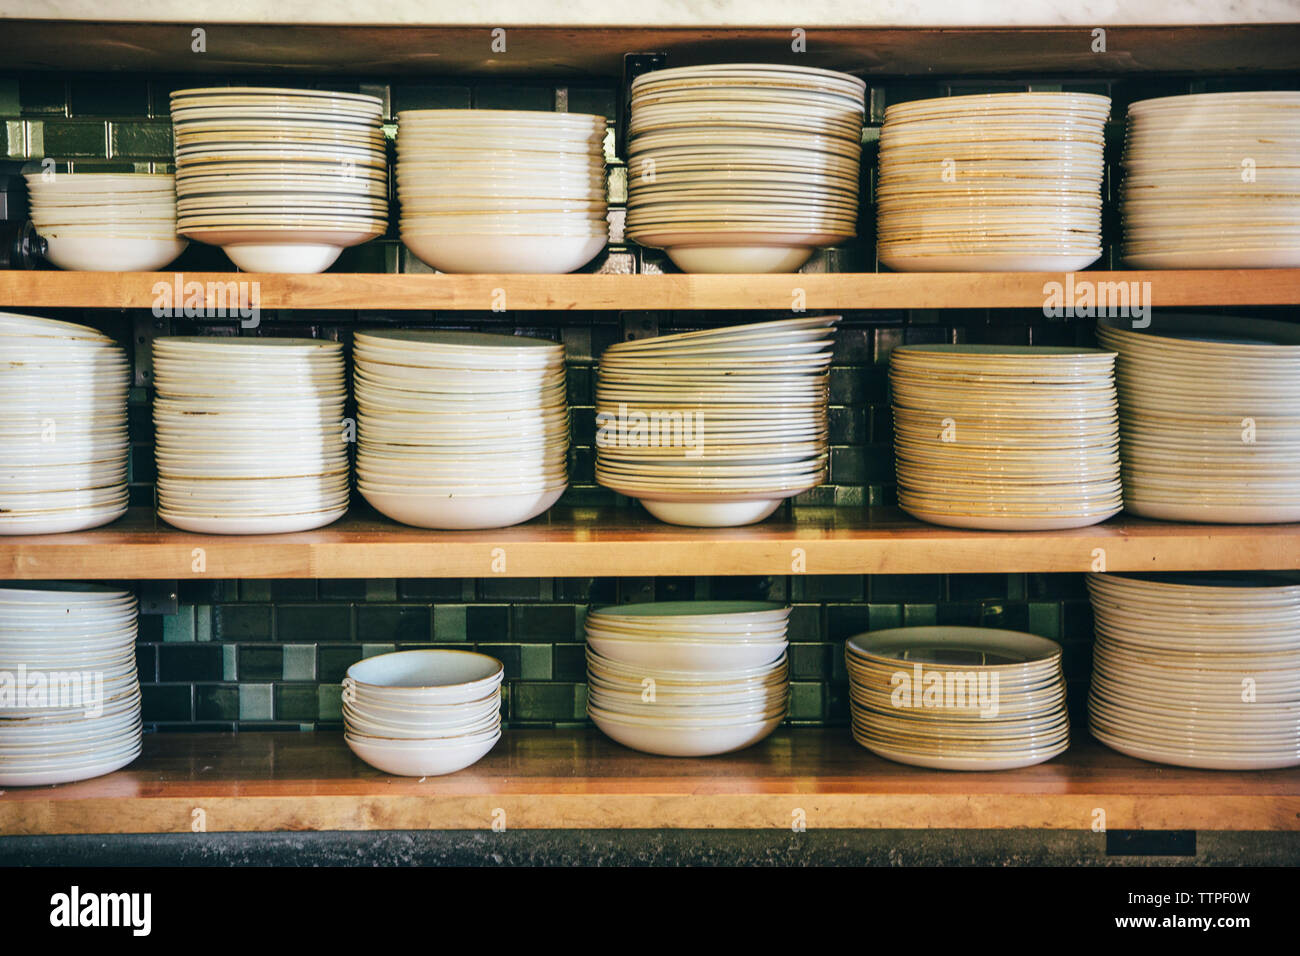 Close-up of plates and bowls on shelves at commercial kitchen Stock Photo